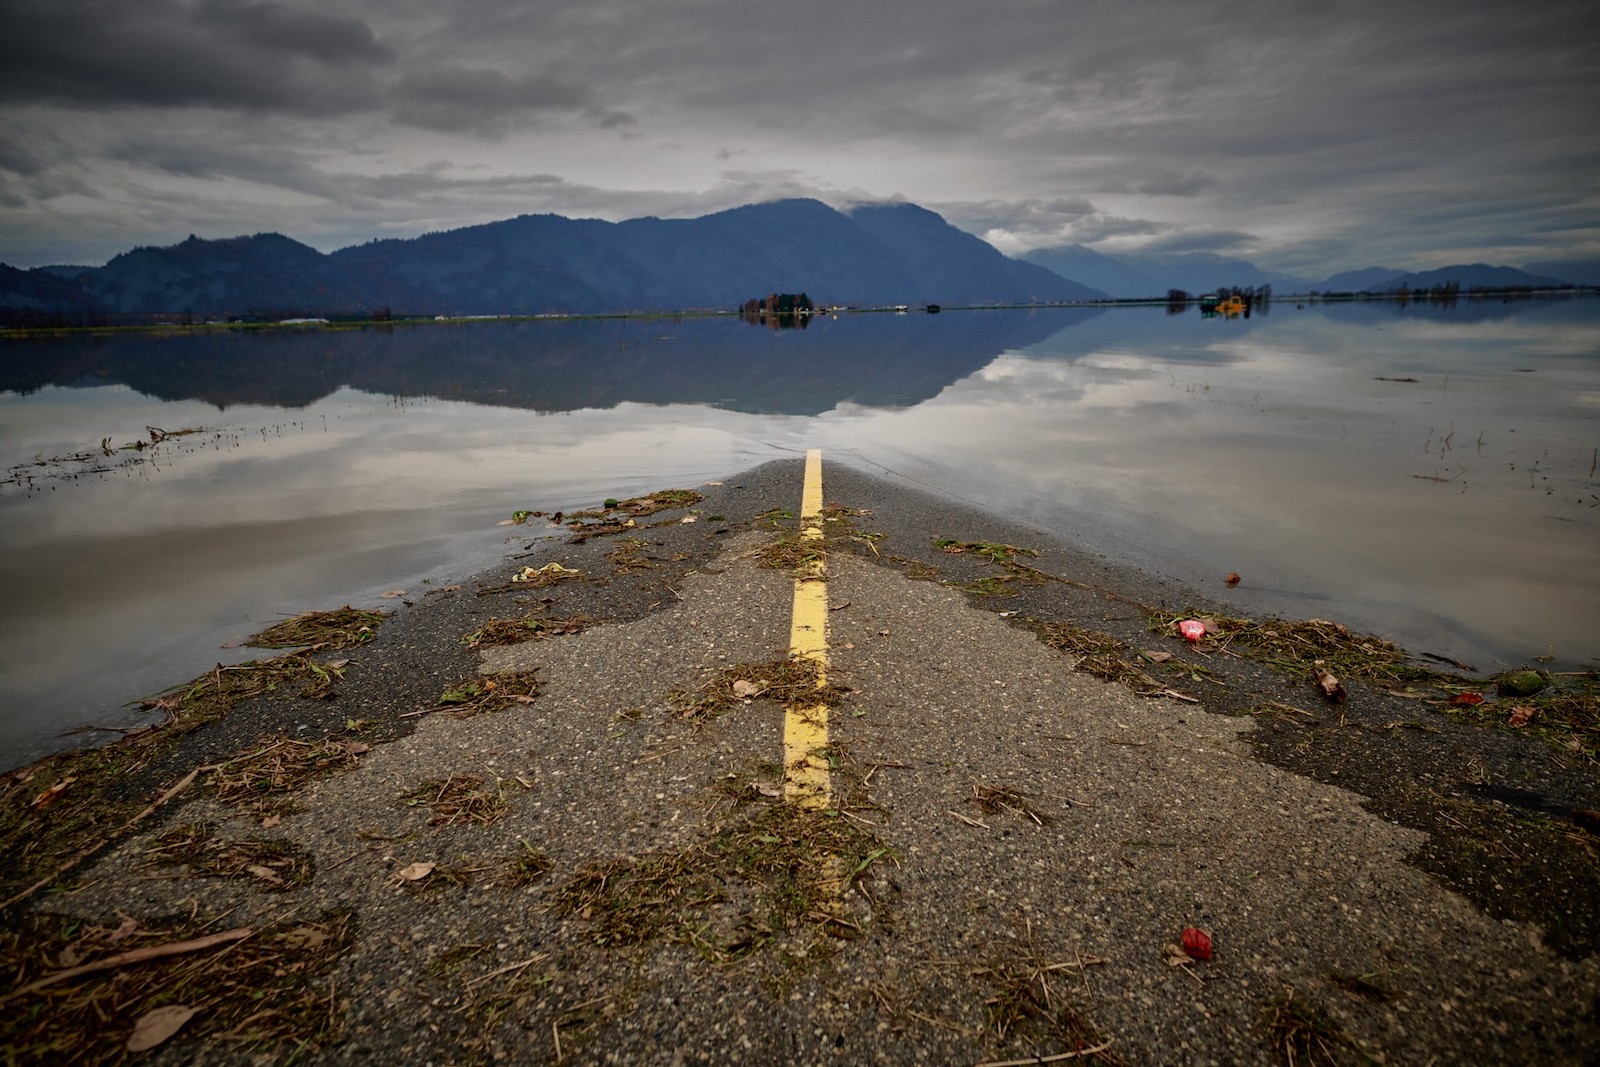 A single yellow line highway with debris in the foreground is covered by floodwaters in the mid-ground, with mountains and cloudy skies in the background.